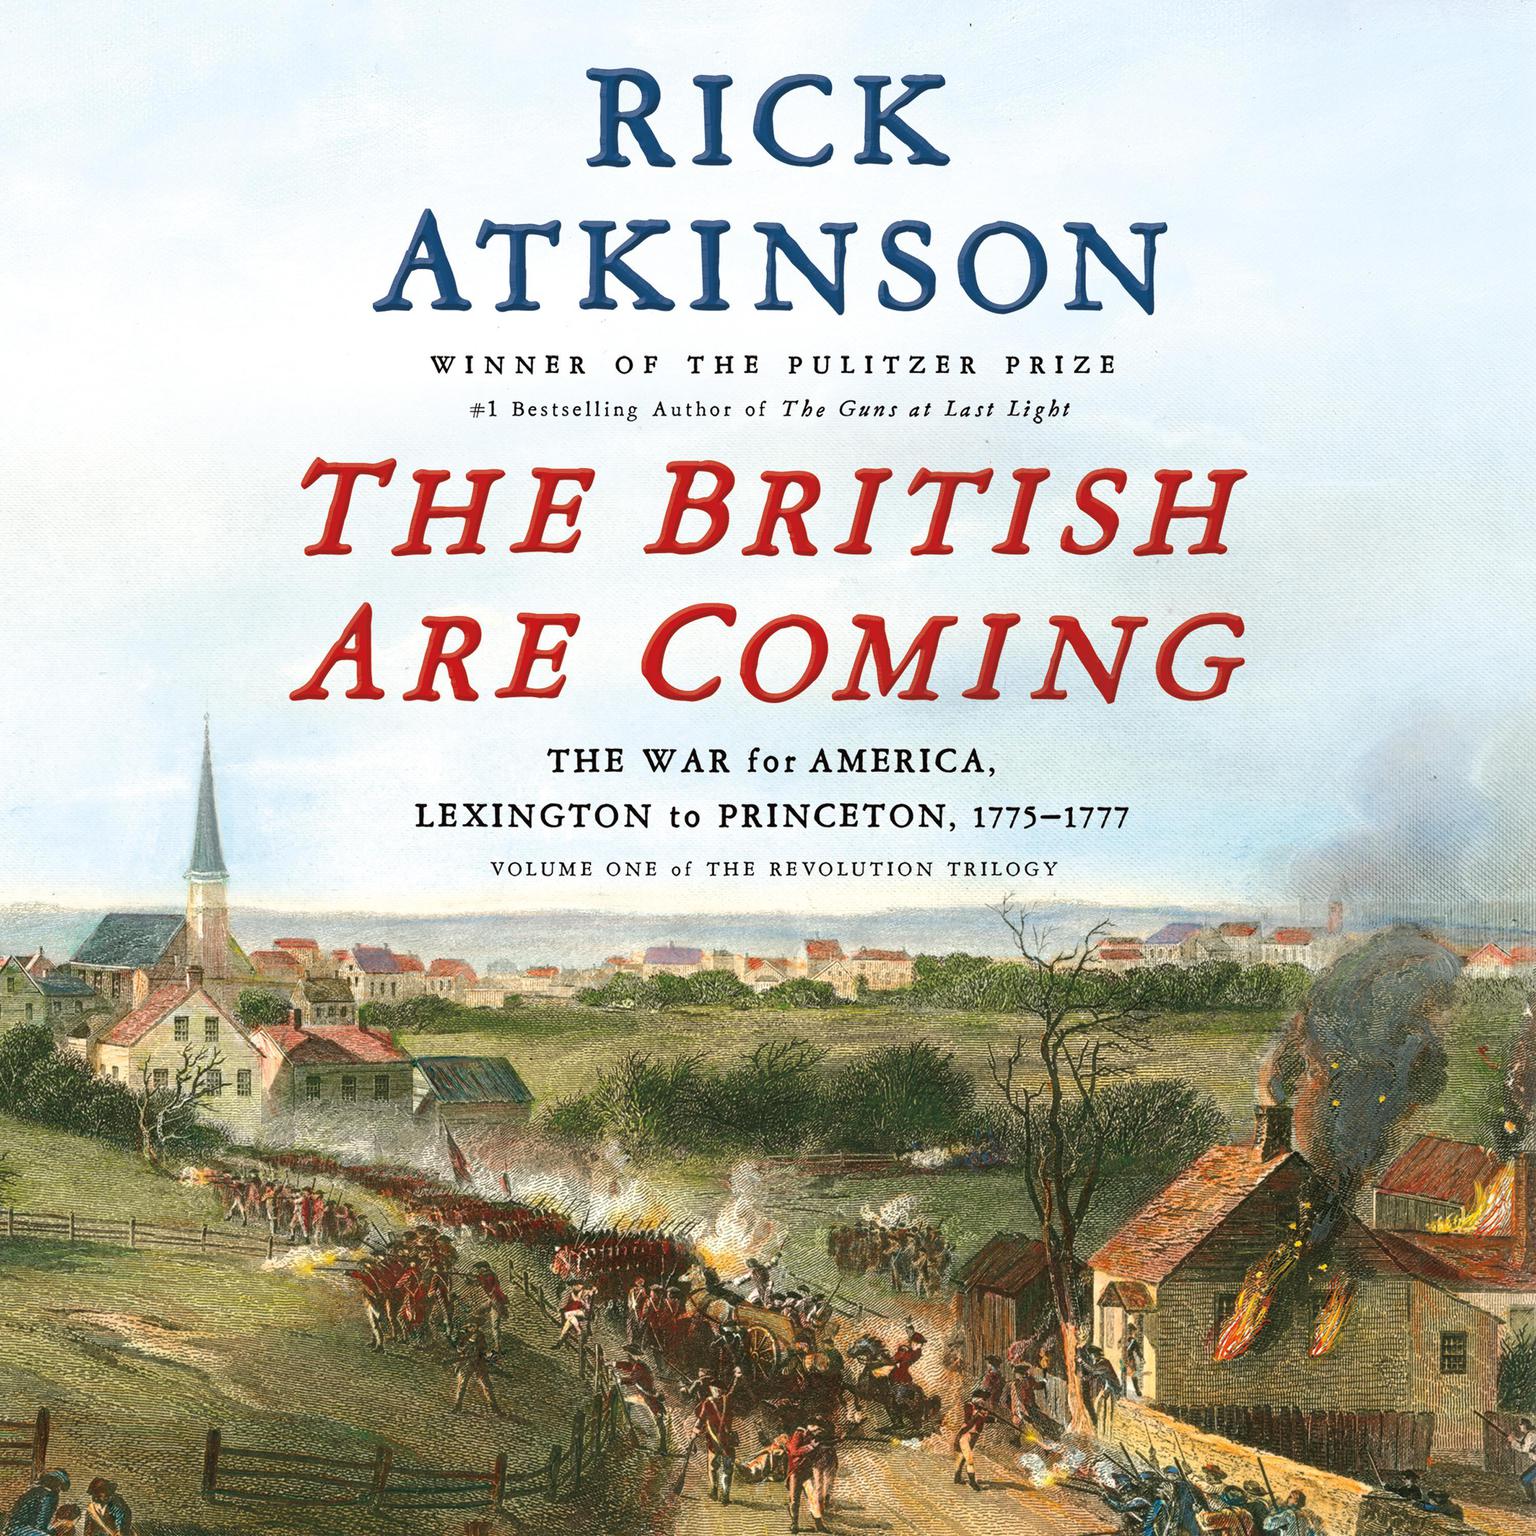 The British Are Coming (Abridged): The War for America, Lexington to Princeton, 1775-1777 Audiobook, by Rick Atkinson